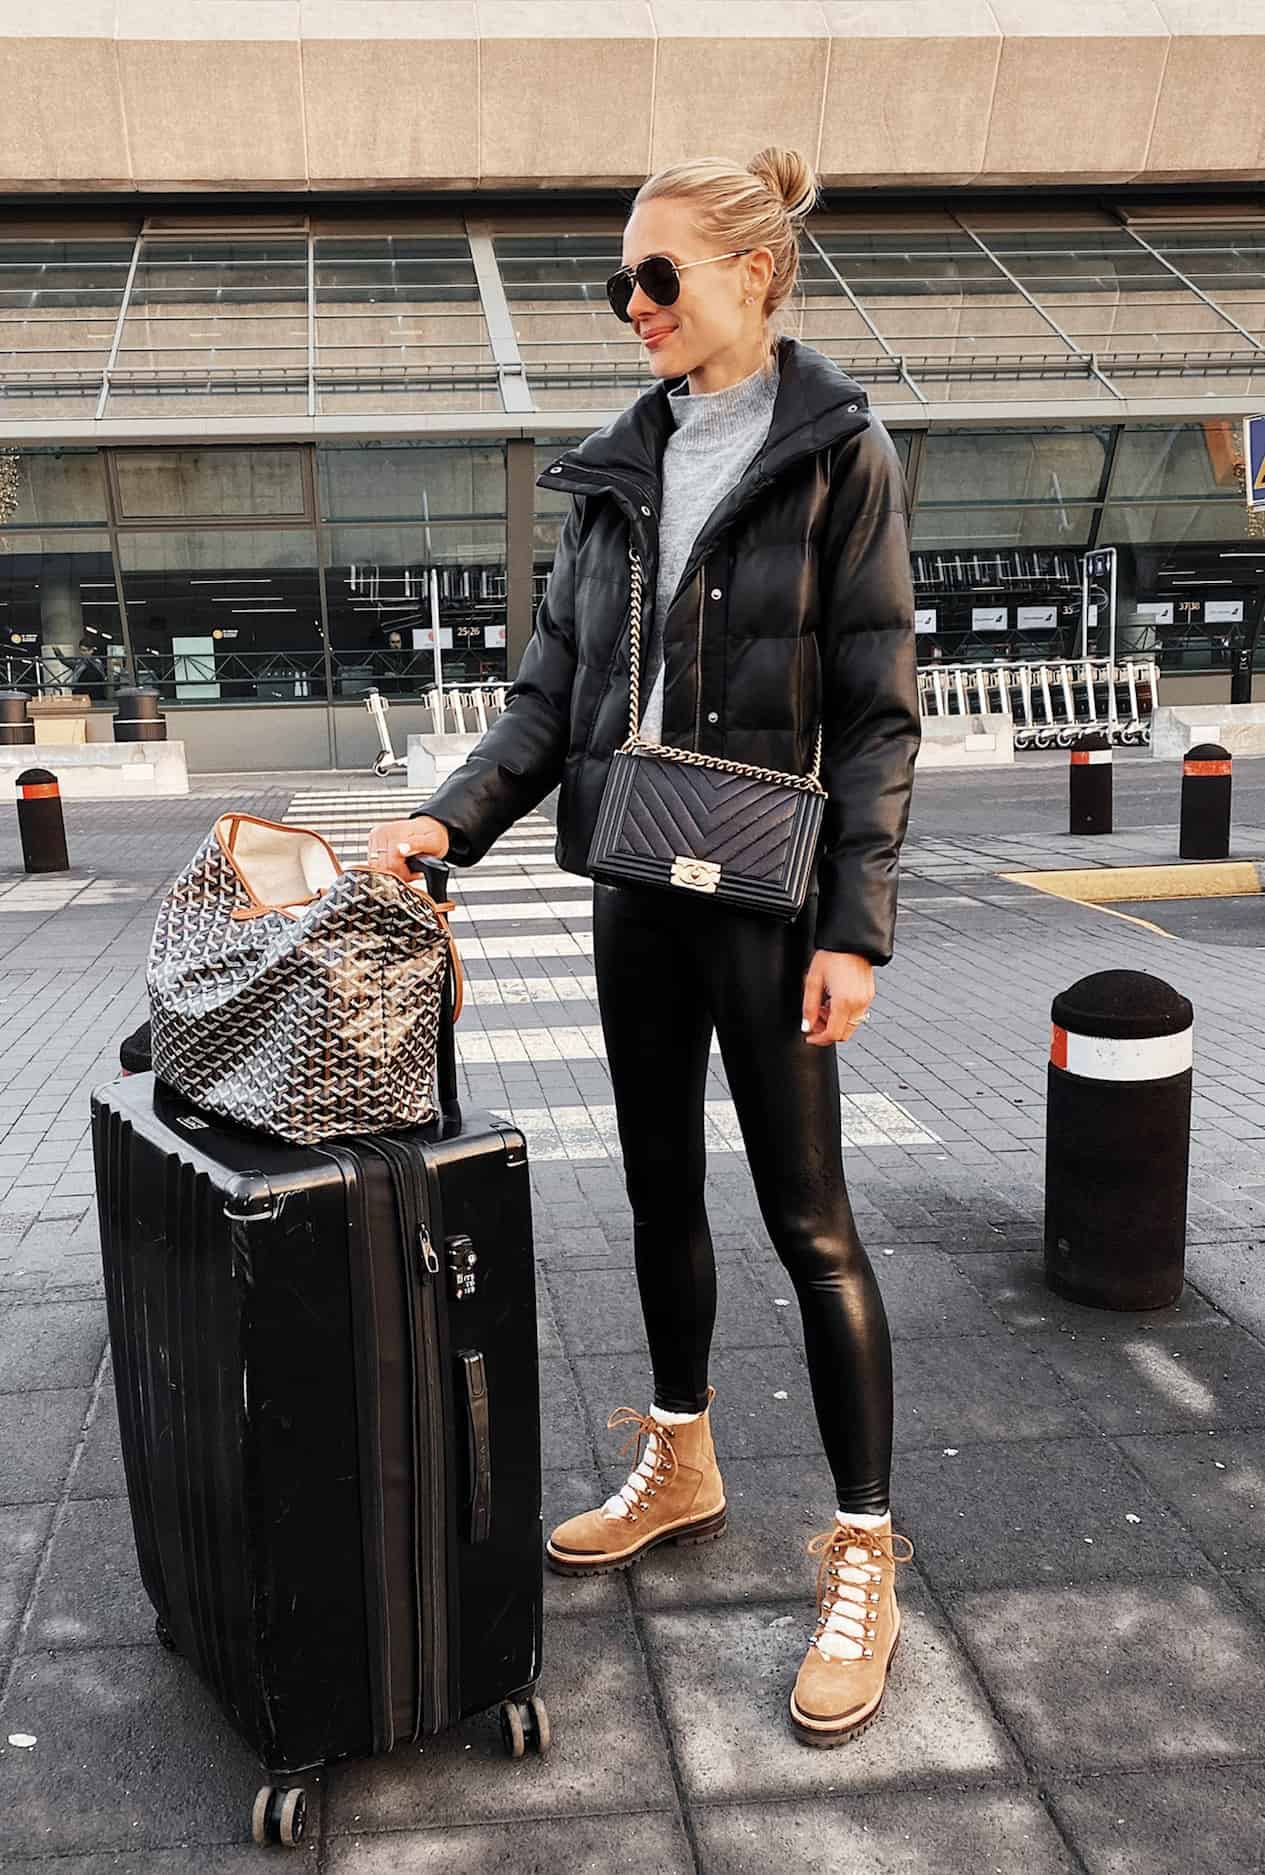 image of a woman standing in an airport terminal wearing a black puffer jacket, leather leggings, and winter boots